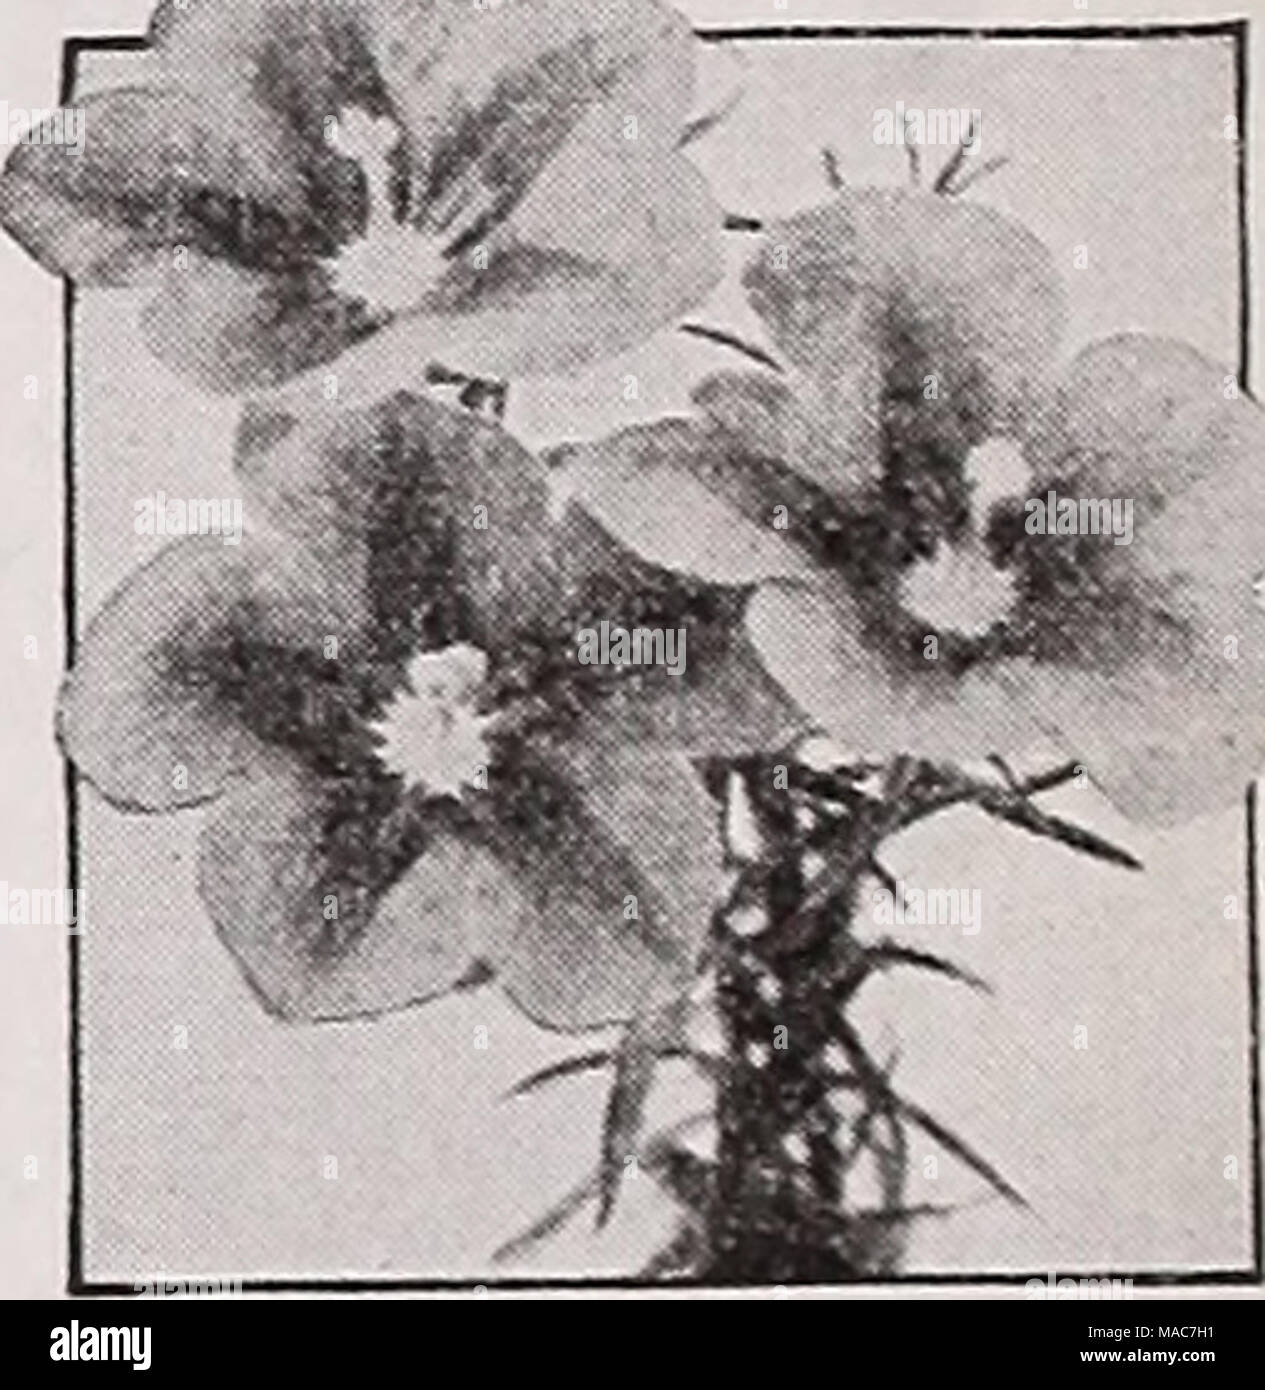 . Dreer's novelties and specialties 1939 : 101 years of Dreer quality seeds plants bulbs . Nierembergia Caerulea Nierembergia—B/ue Cups ® a 3159 Caerulea {Hippomanica). Grace- ful plants 4 to 6 inches tall and spreading more than a foot. The fern-like, bright green foliage is hidden by a mass of lovely cup-shaped lavender-blue flowers. Blooms profusely throughout the sum- mer and autumn. Pkt. 25c; special pkt. 75 c. New Pansies 3248 Shakespeare's Pansies. Though small-flowered this is a most desirable little Pansy of simple, quaint beauty. Many charming colors and blooming freely throughout th Stock Photo